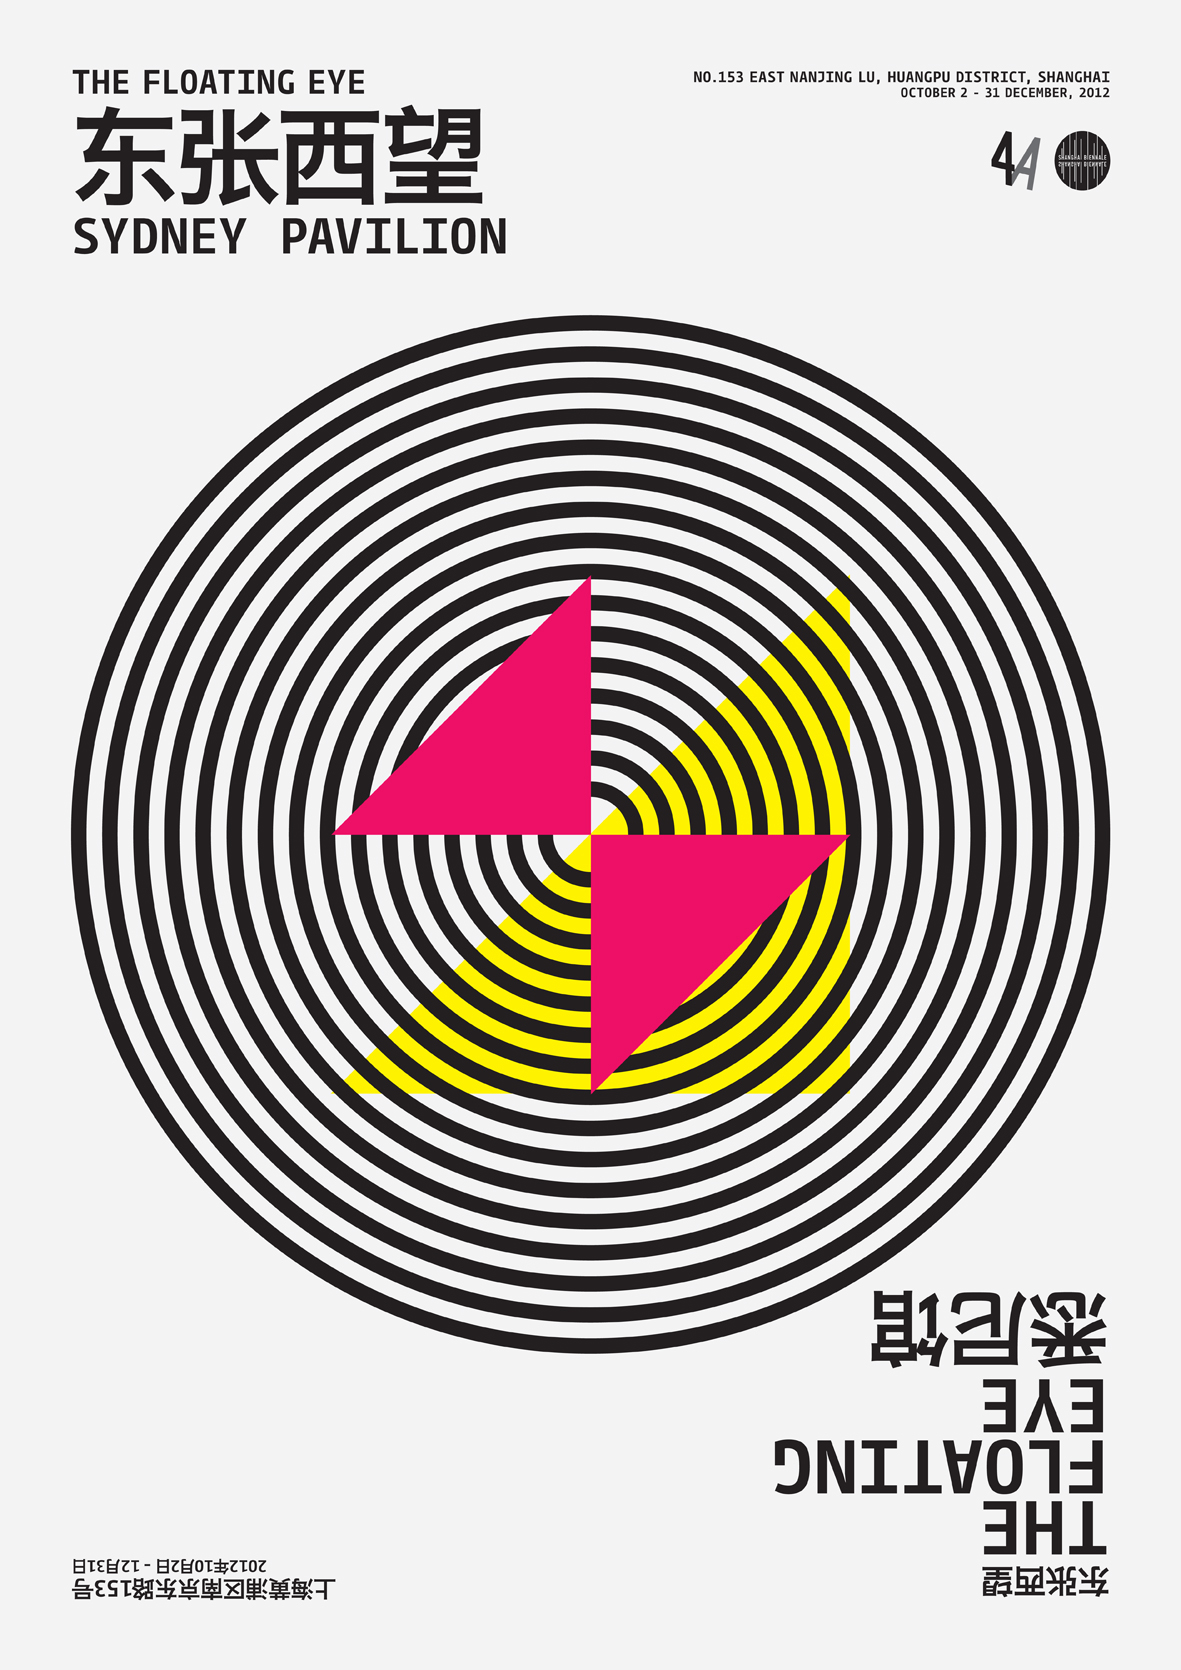 china  art  Gallery  exhibit  floating eye  4a  contemporary lines floating  Geography change Dynamic shanghai social identity